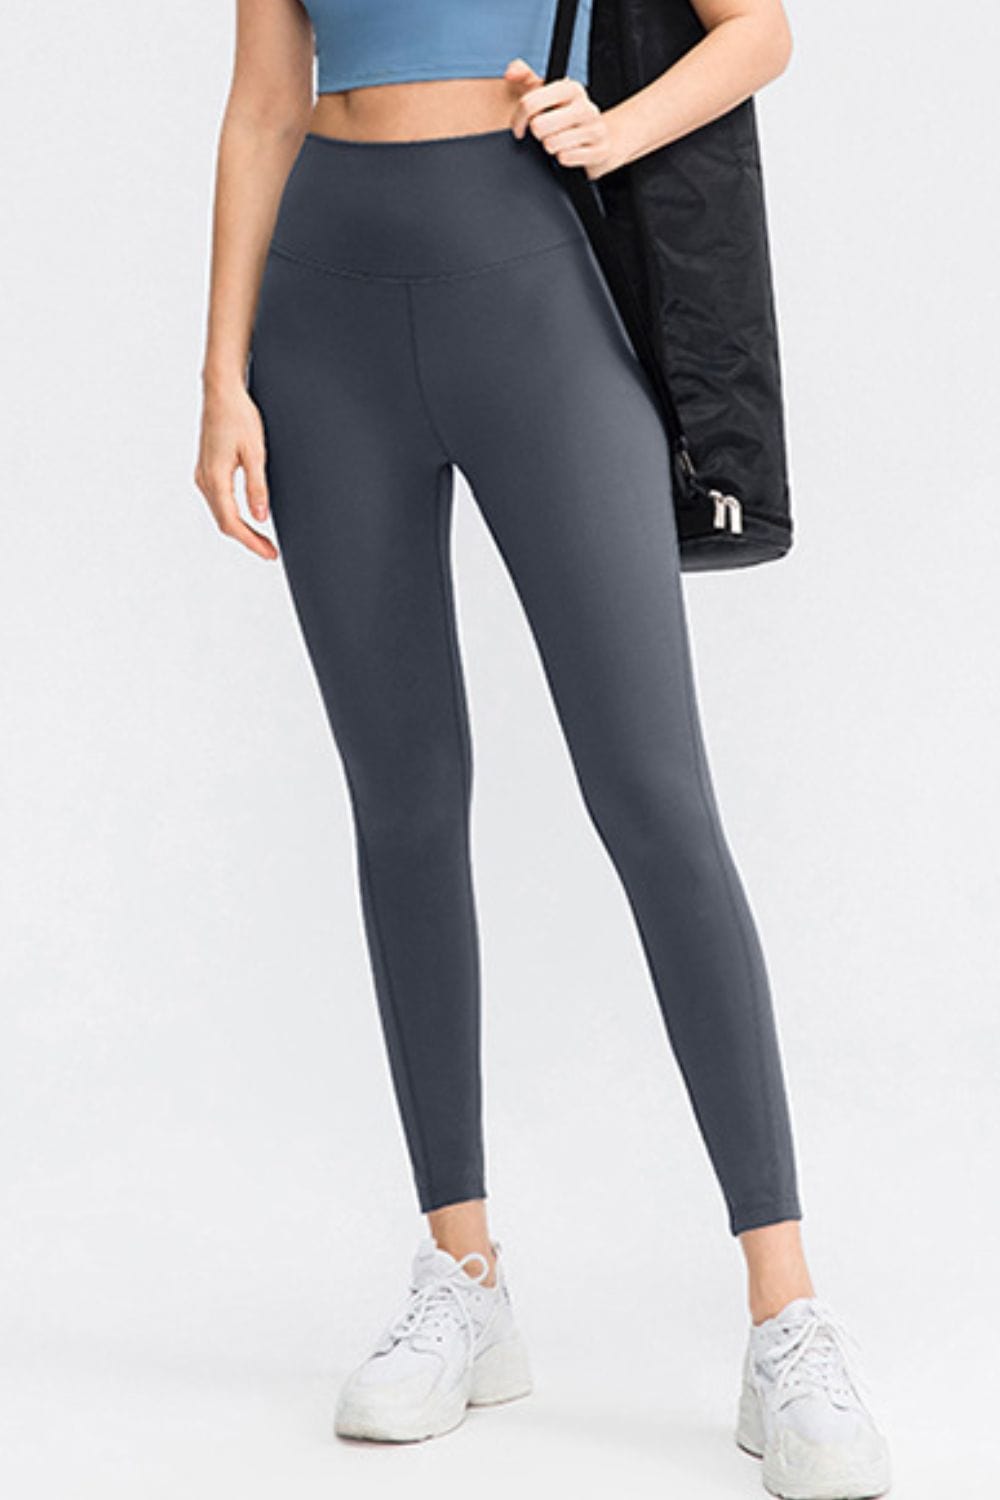 Slim Fit Wide Waistband Long Sports Pants - Runway Frenzy 